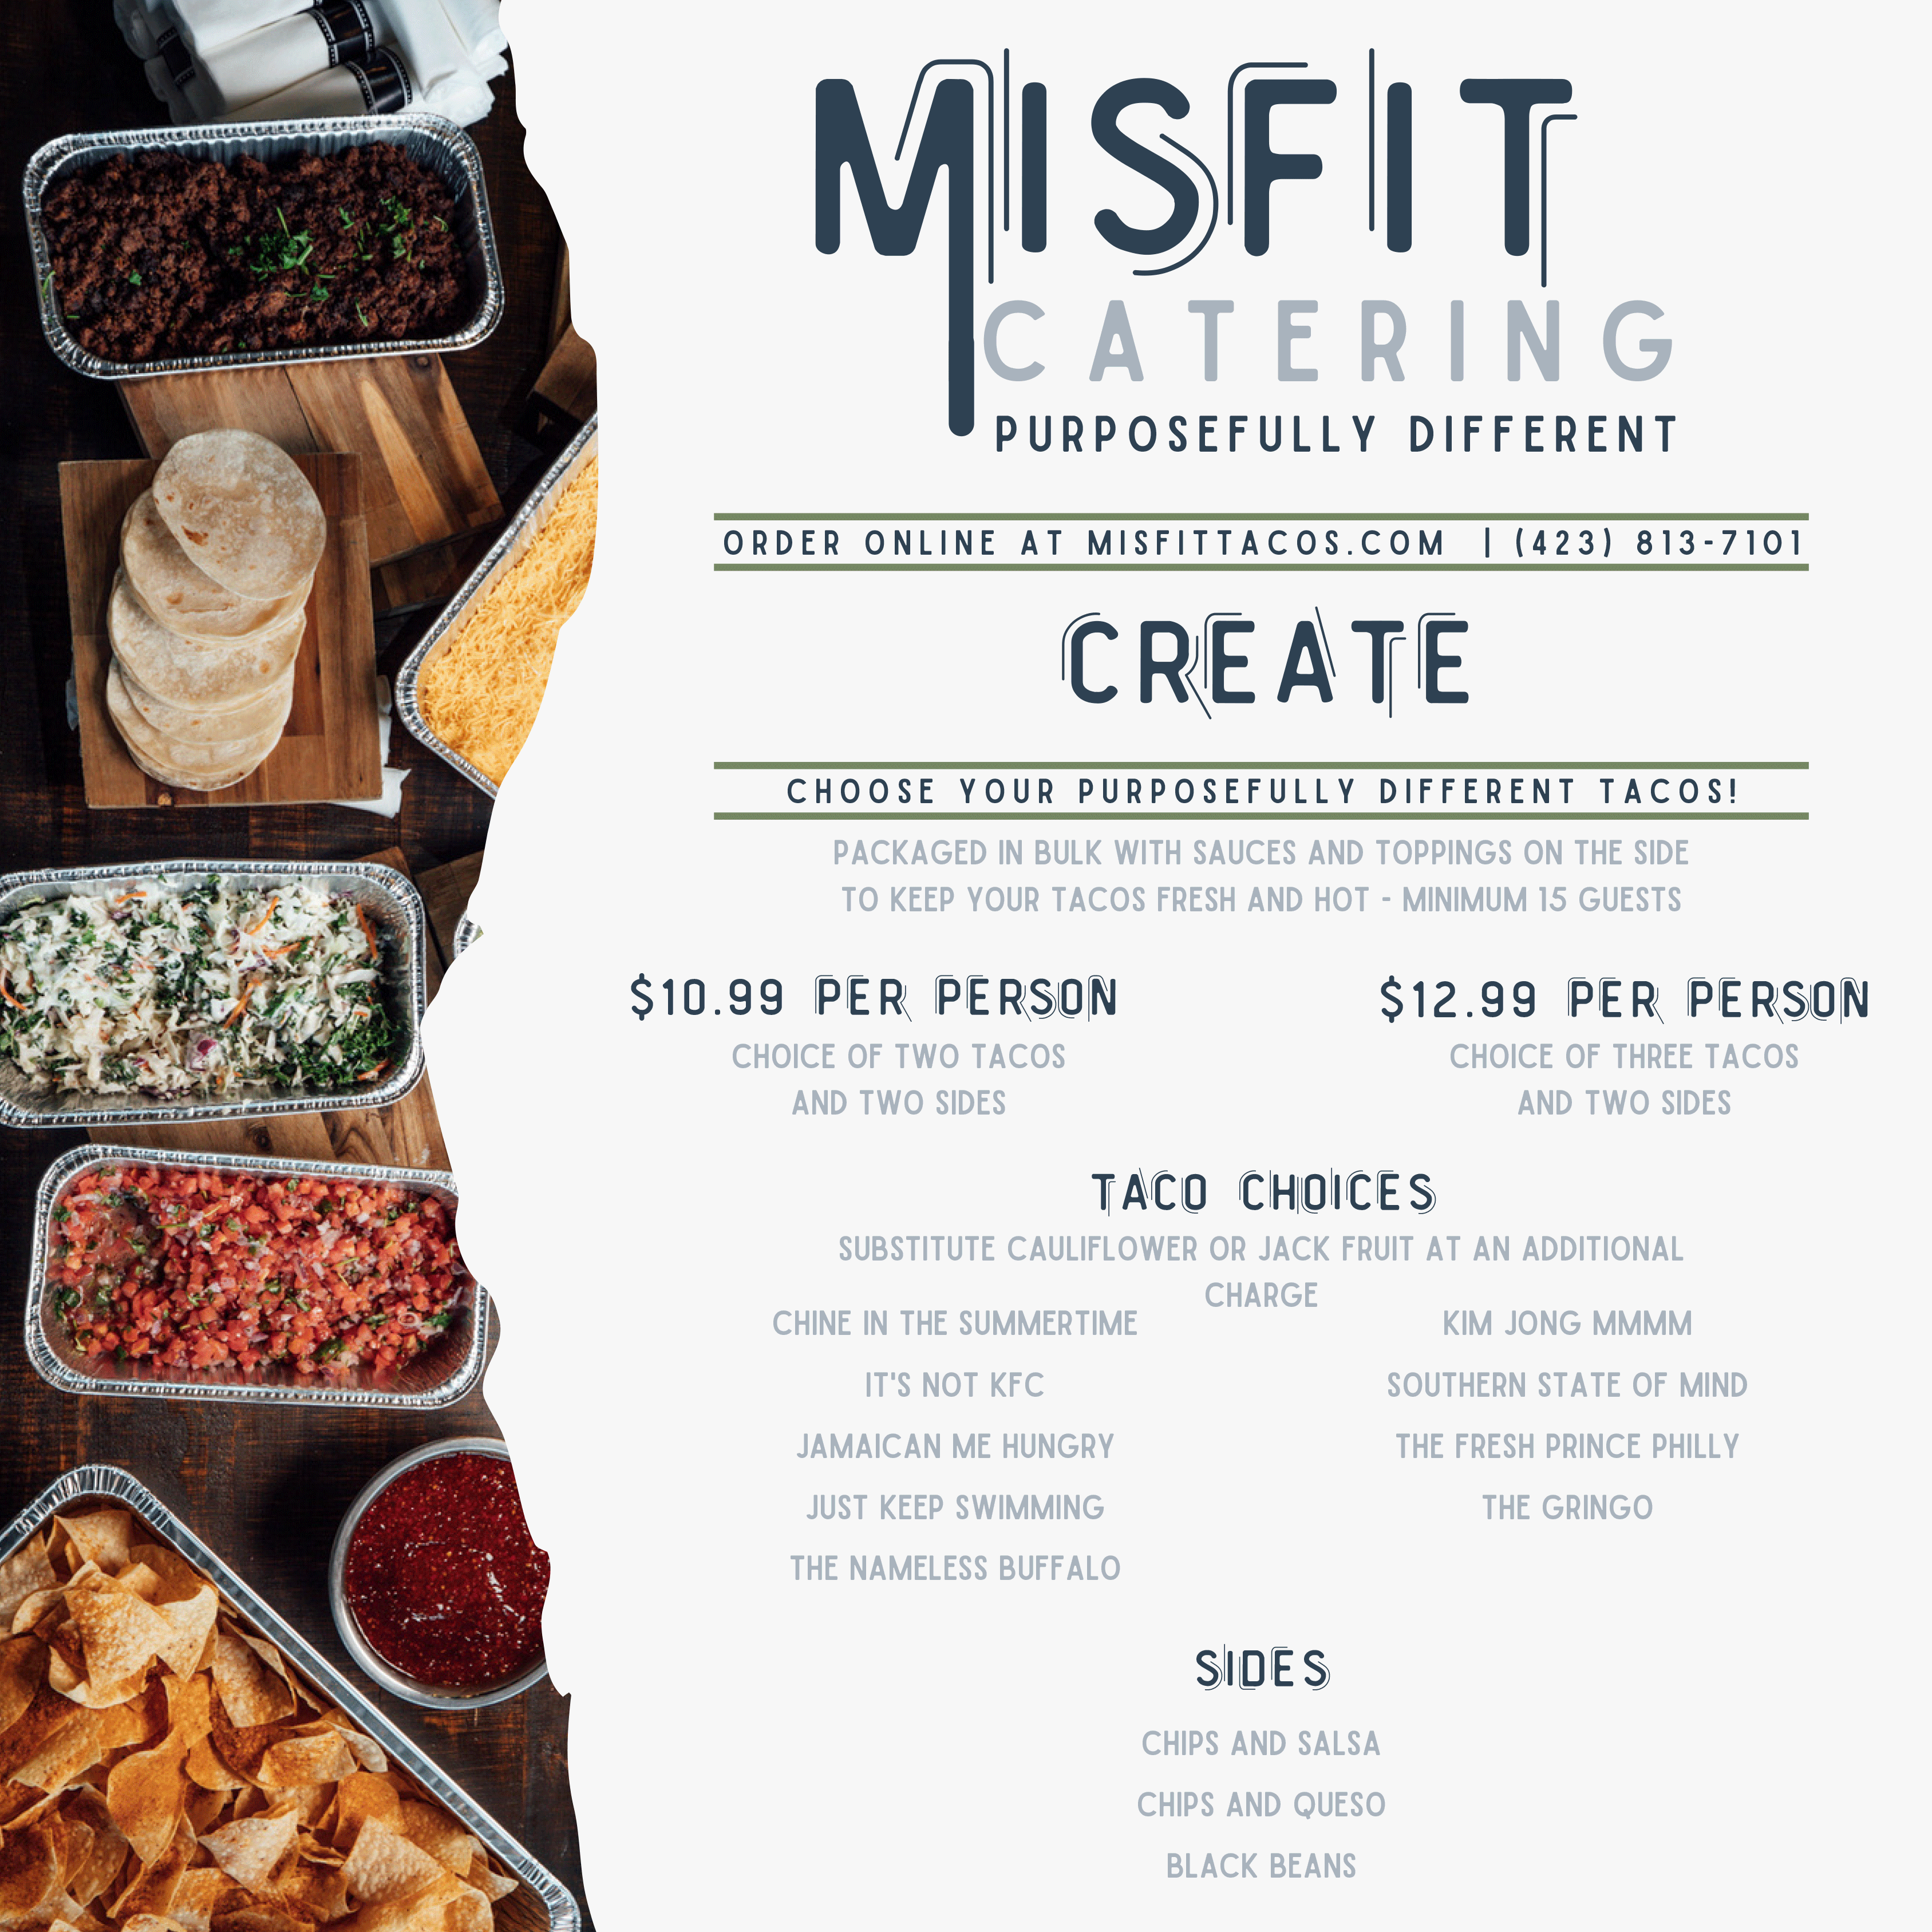 Misfit-Catering-021523-2